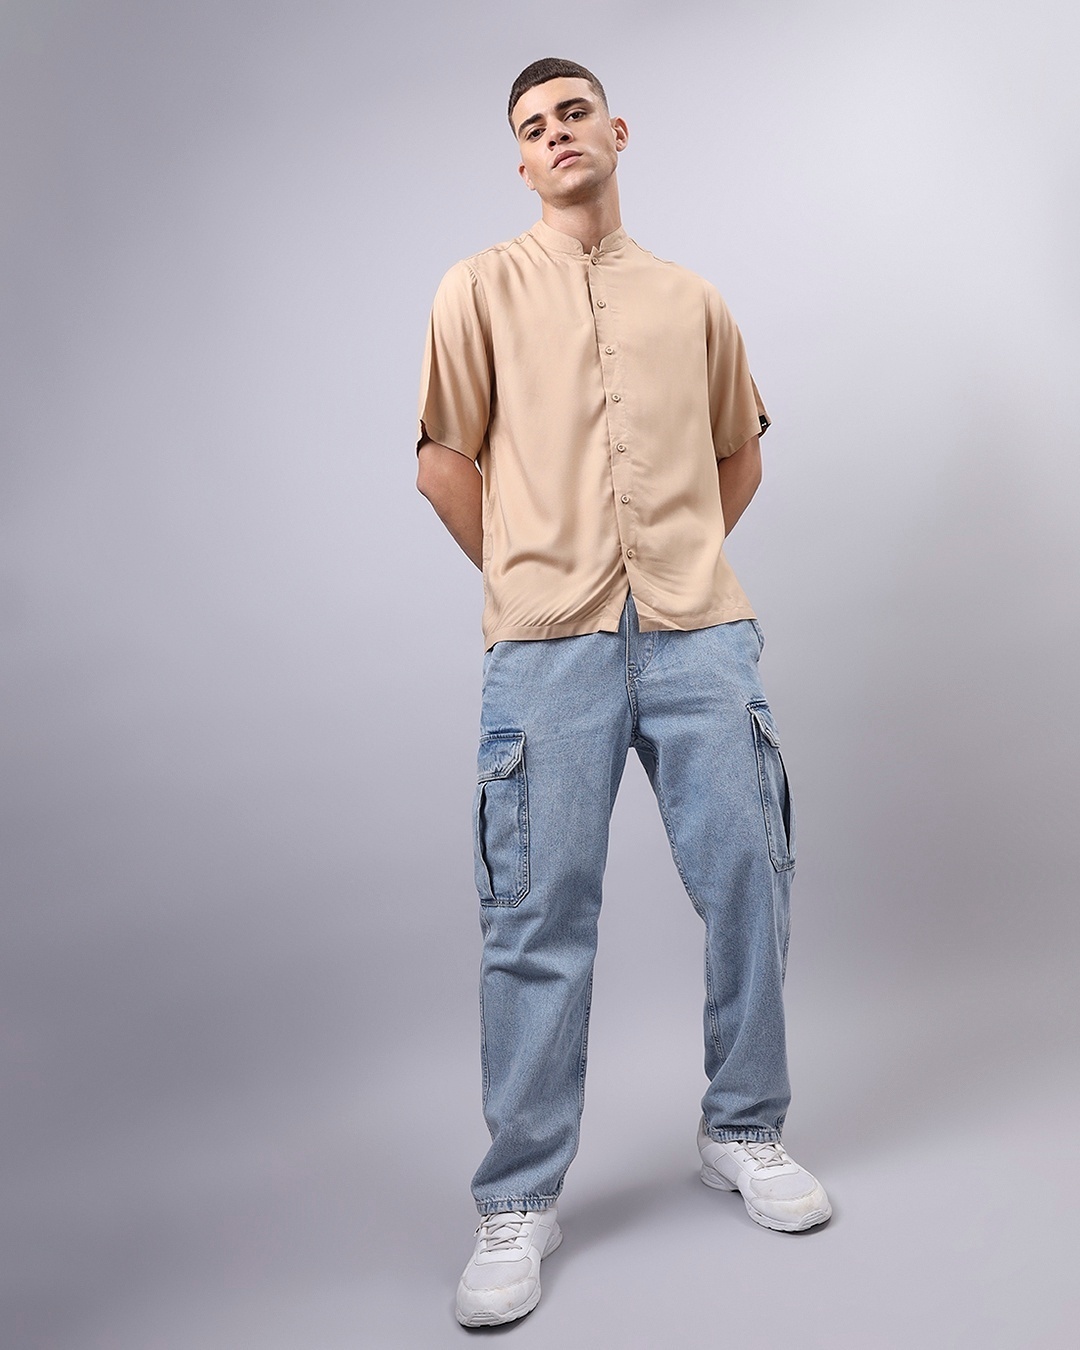 model with Short Height wearing shirt 